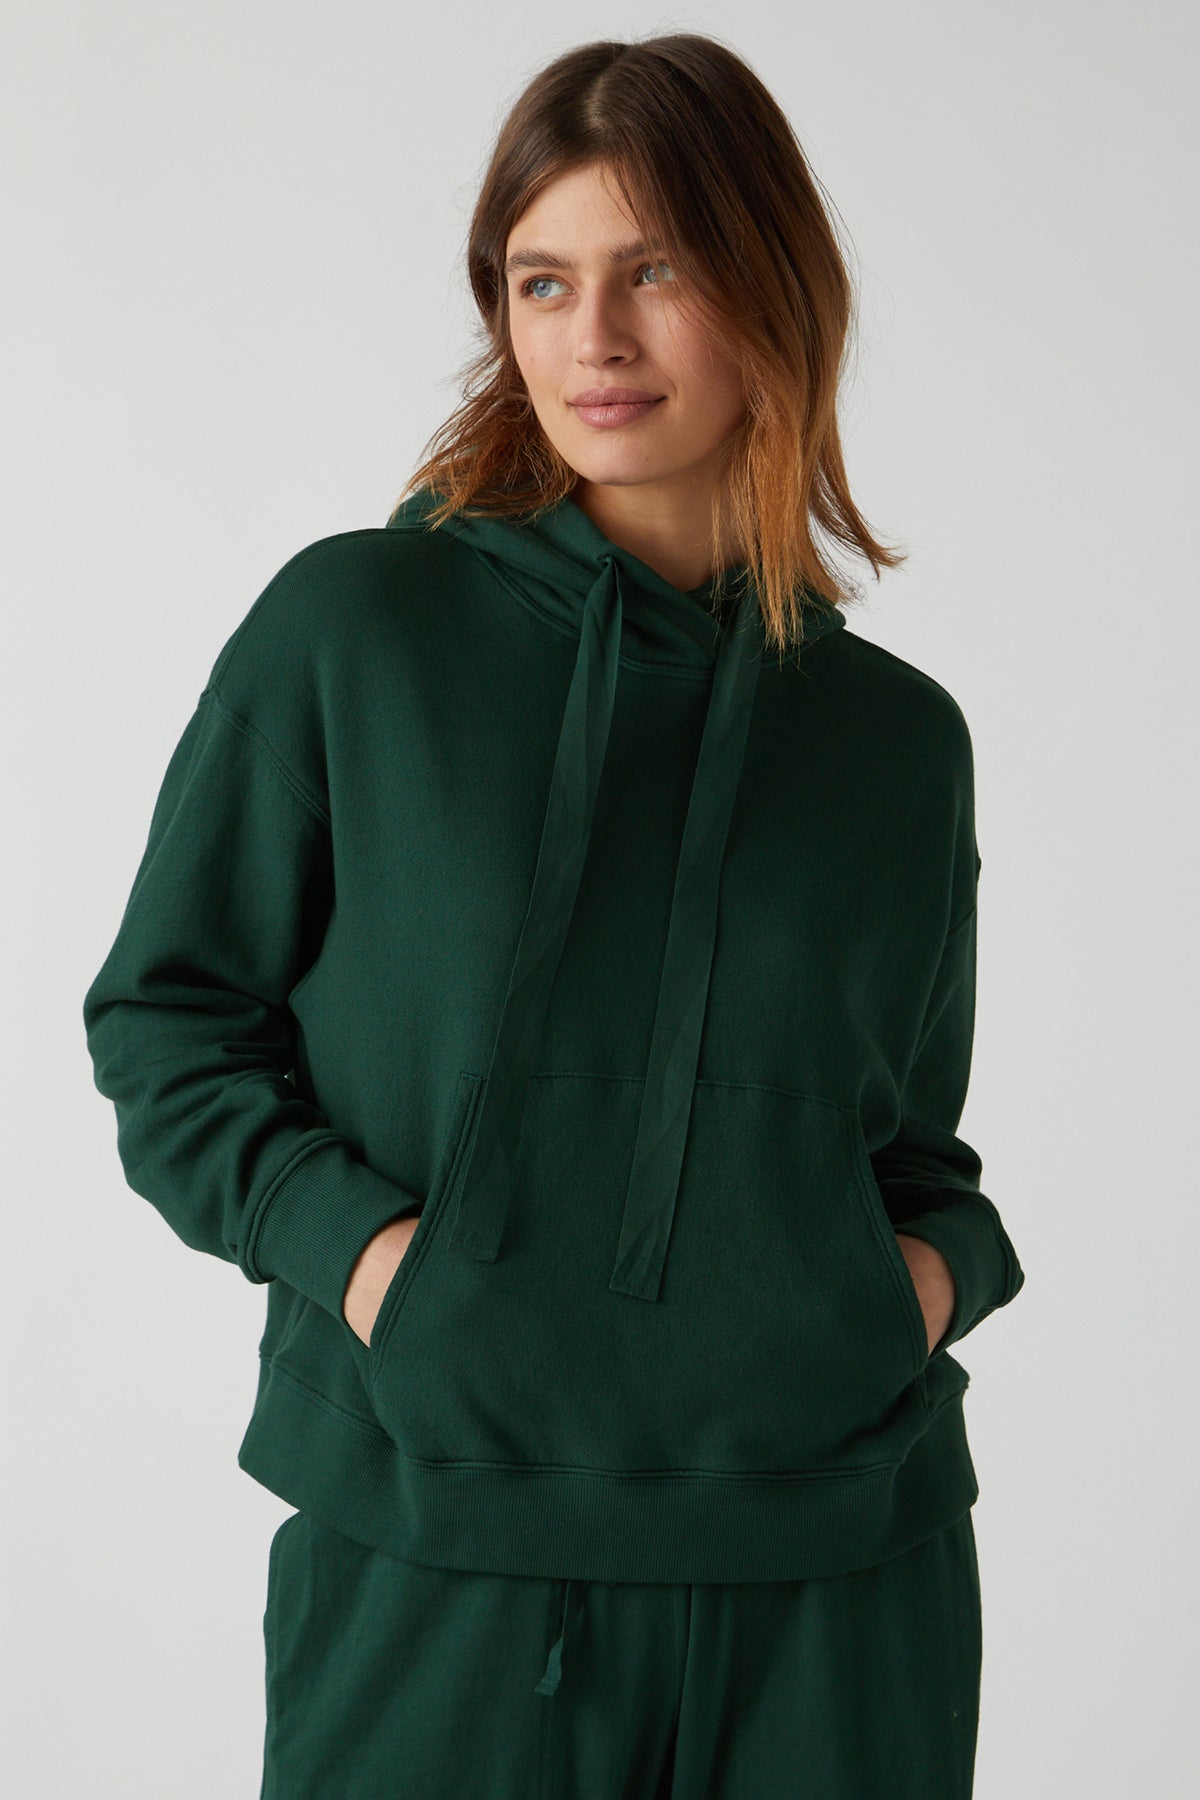 Ojai Hoodie in forest green front-25483563073729